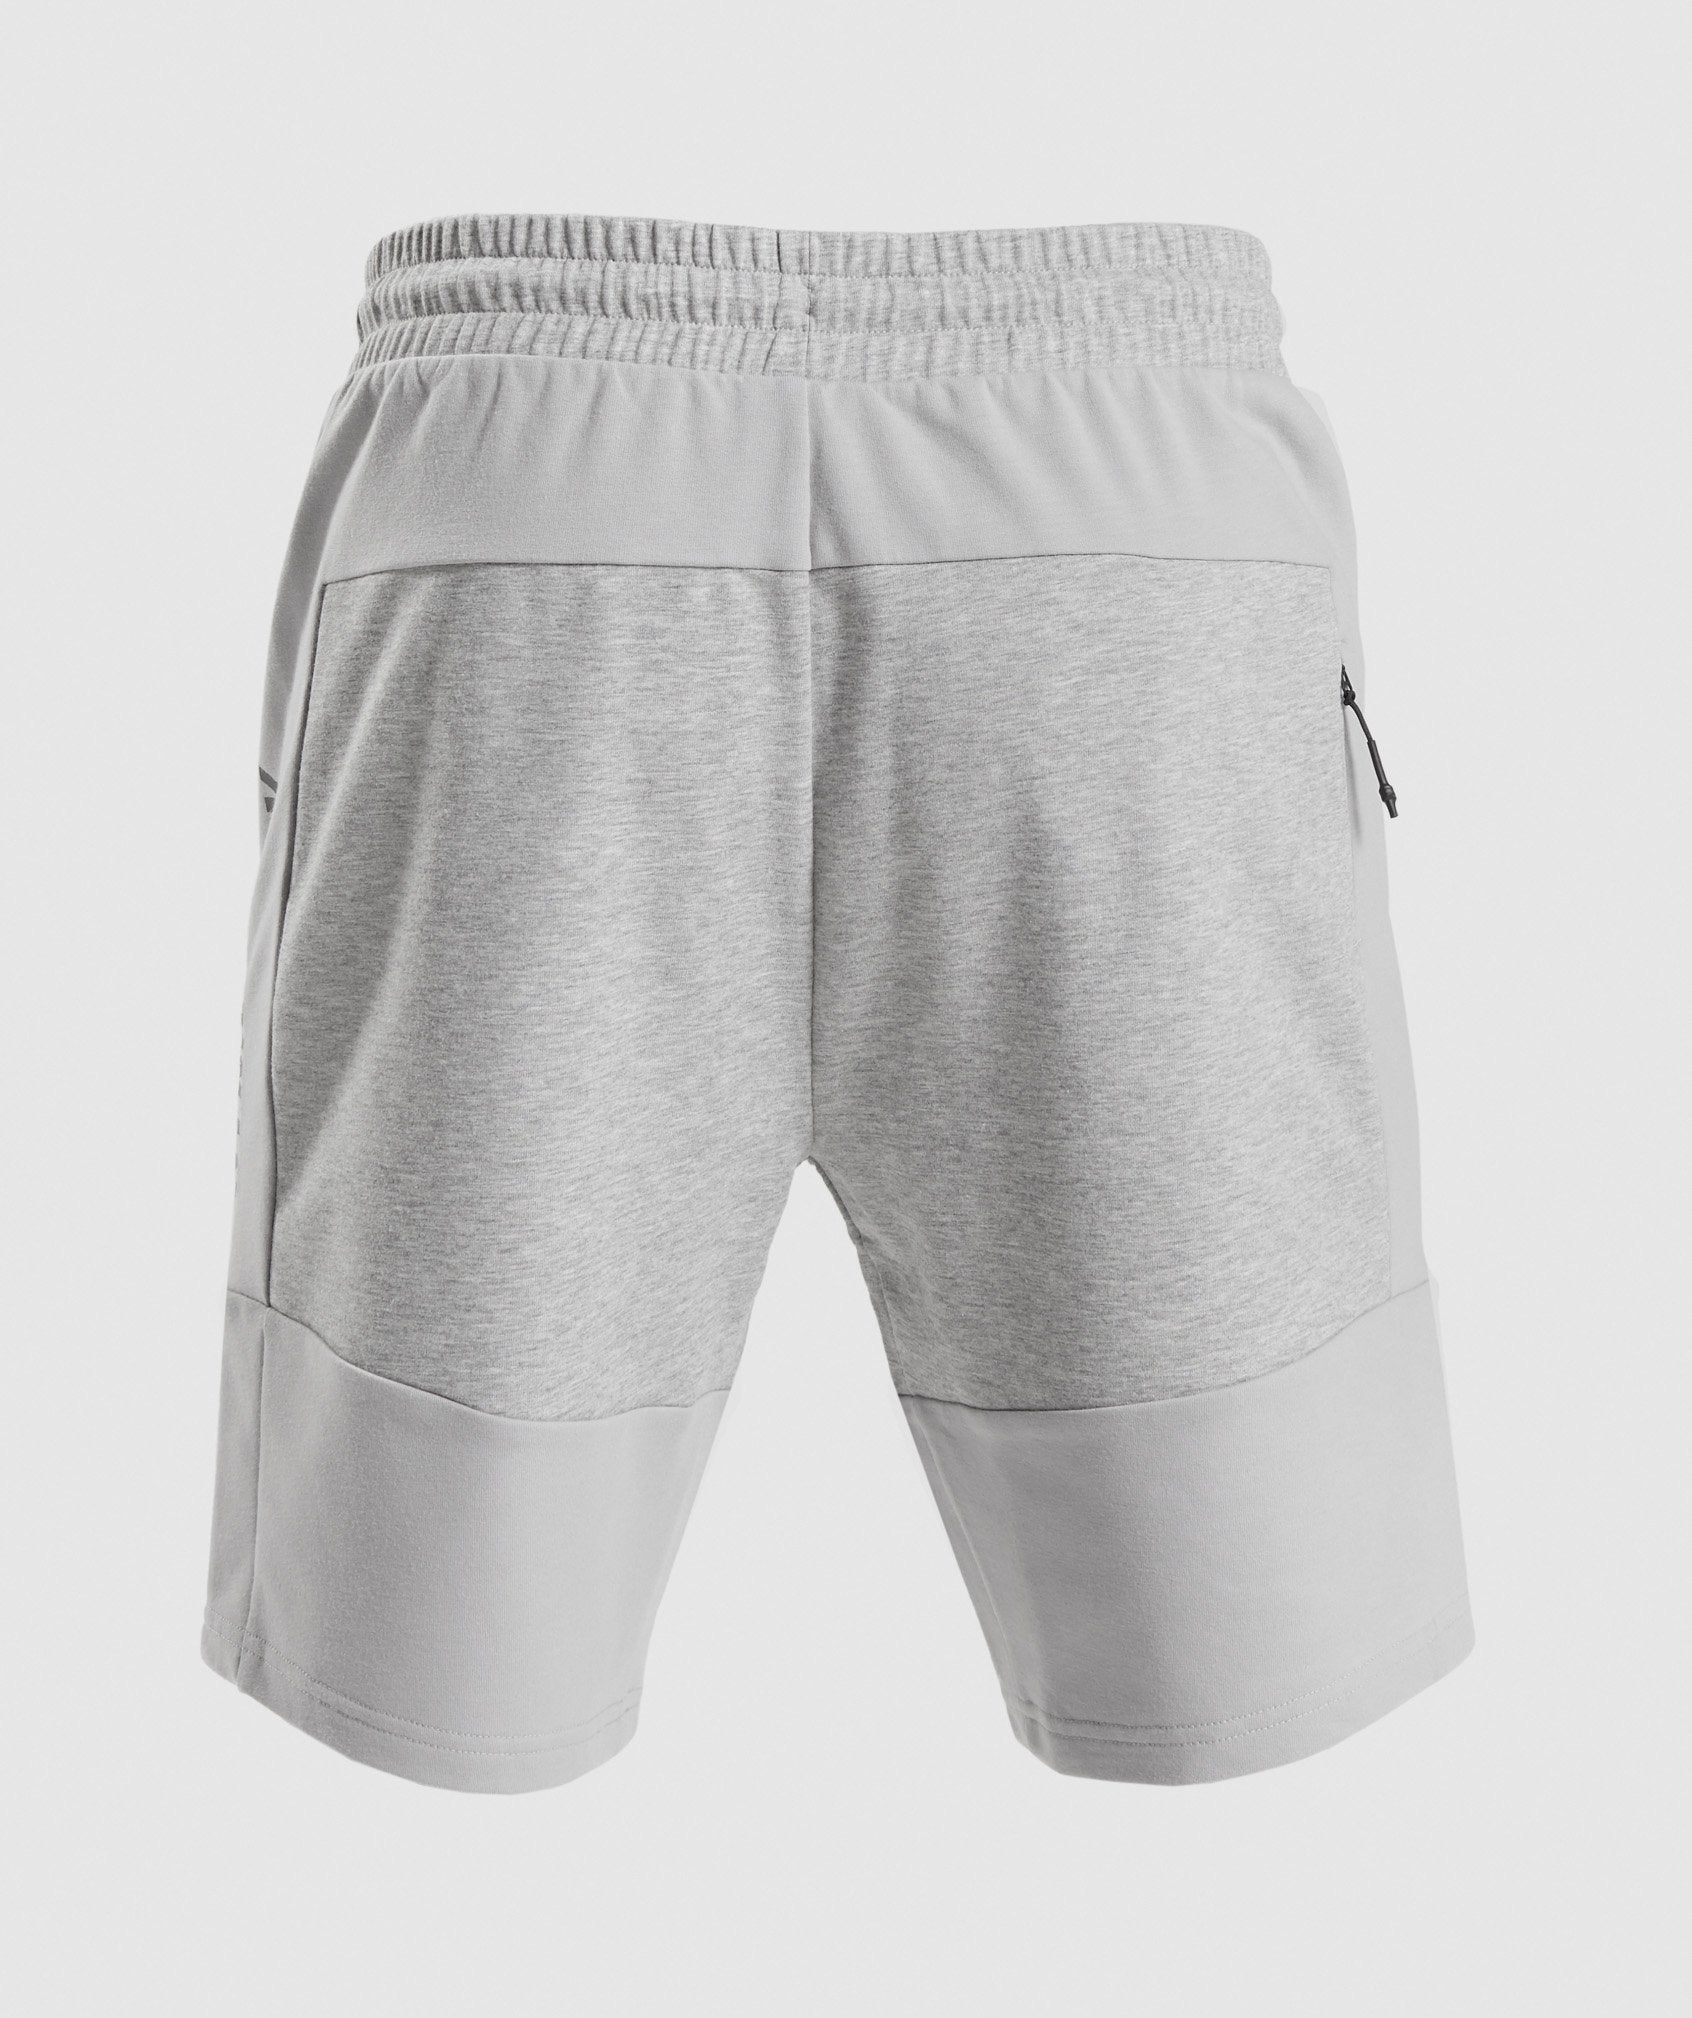 Revive Shorts in Light Grey/Light Grey Marl - view 3